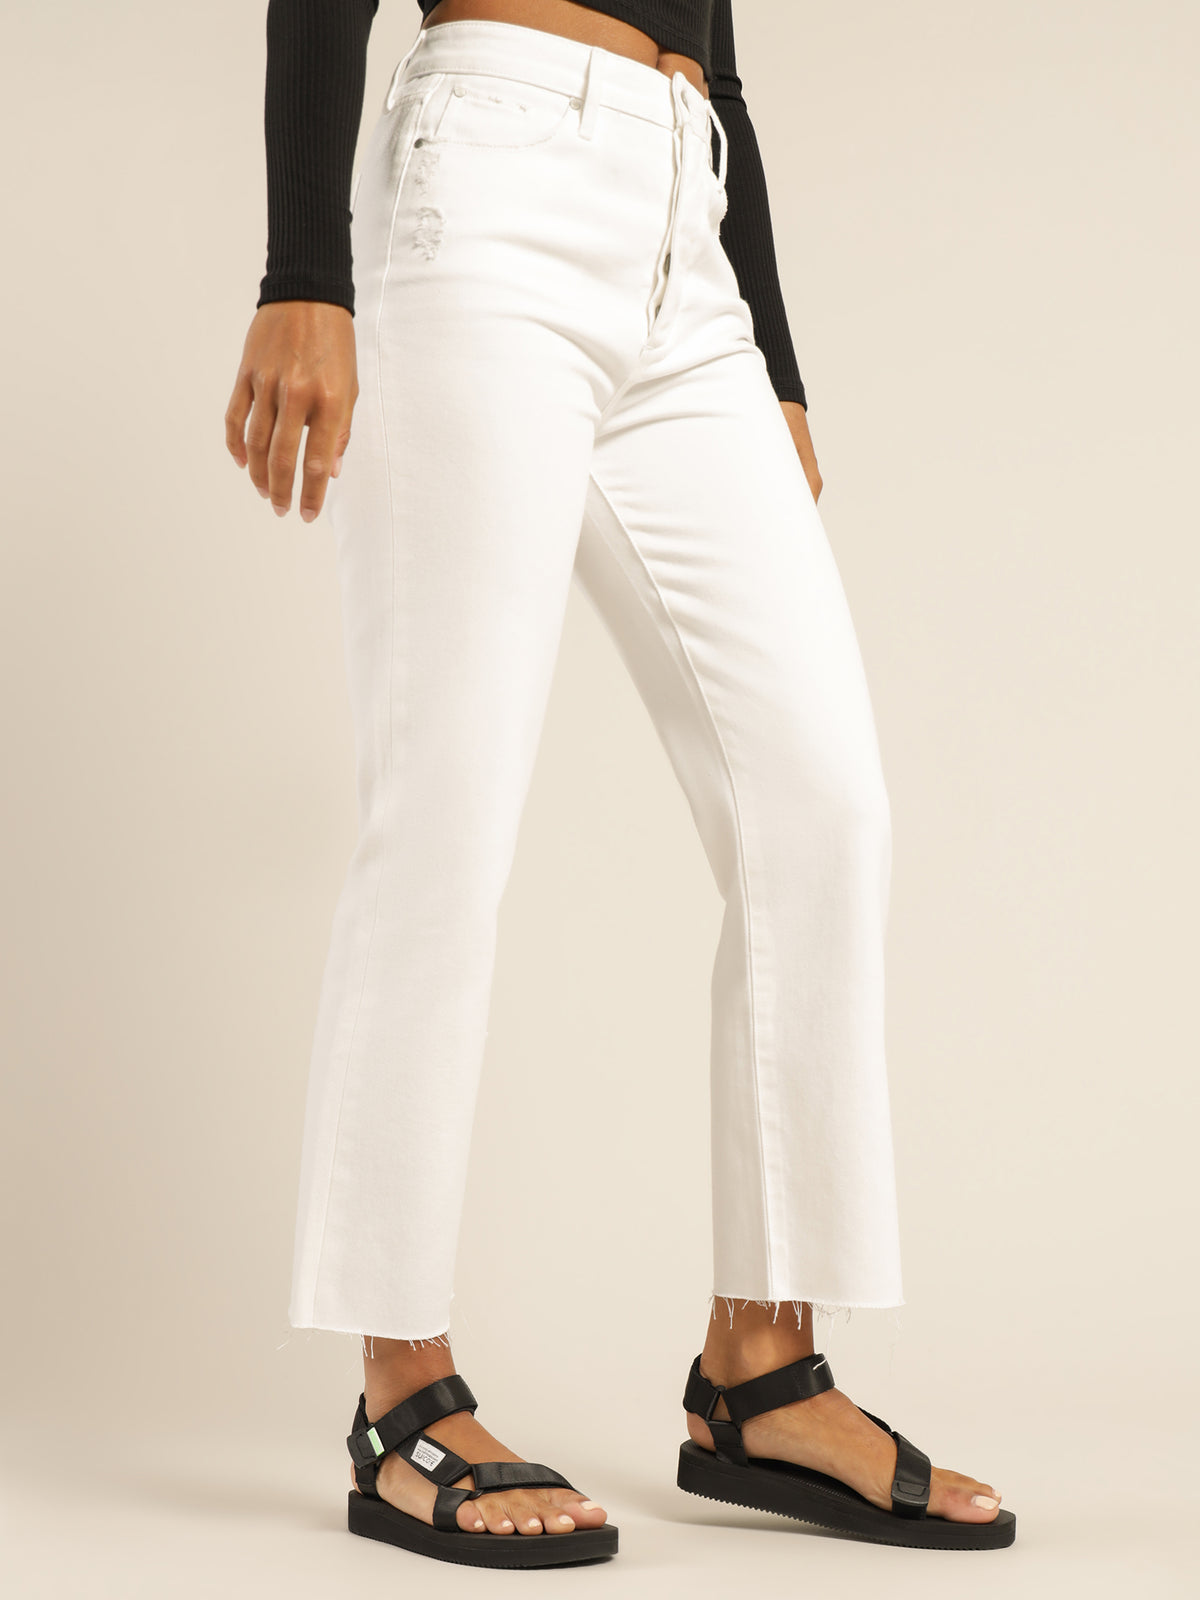 High Nina Crop Jeans in White